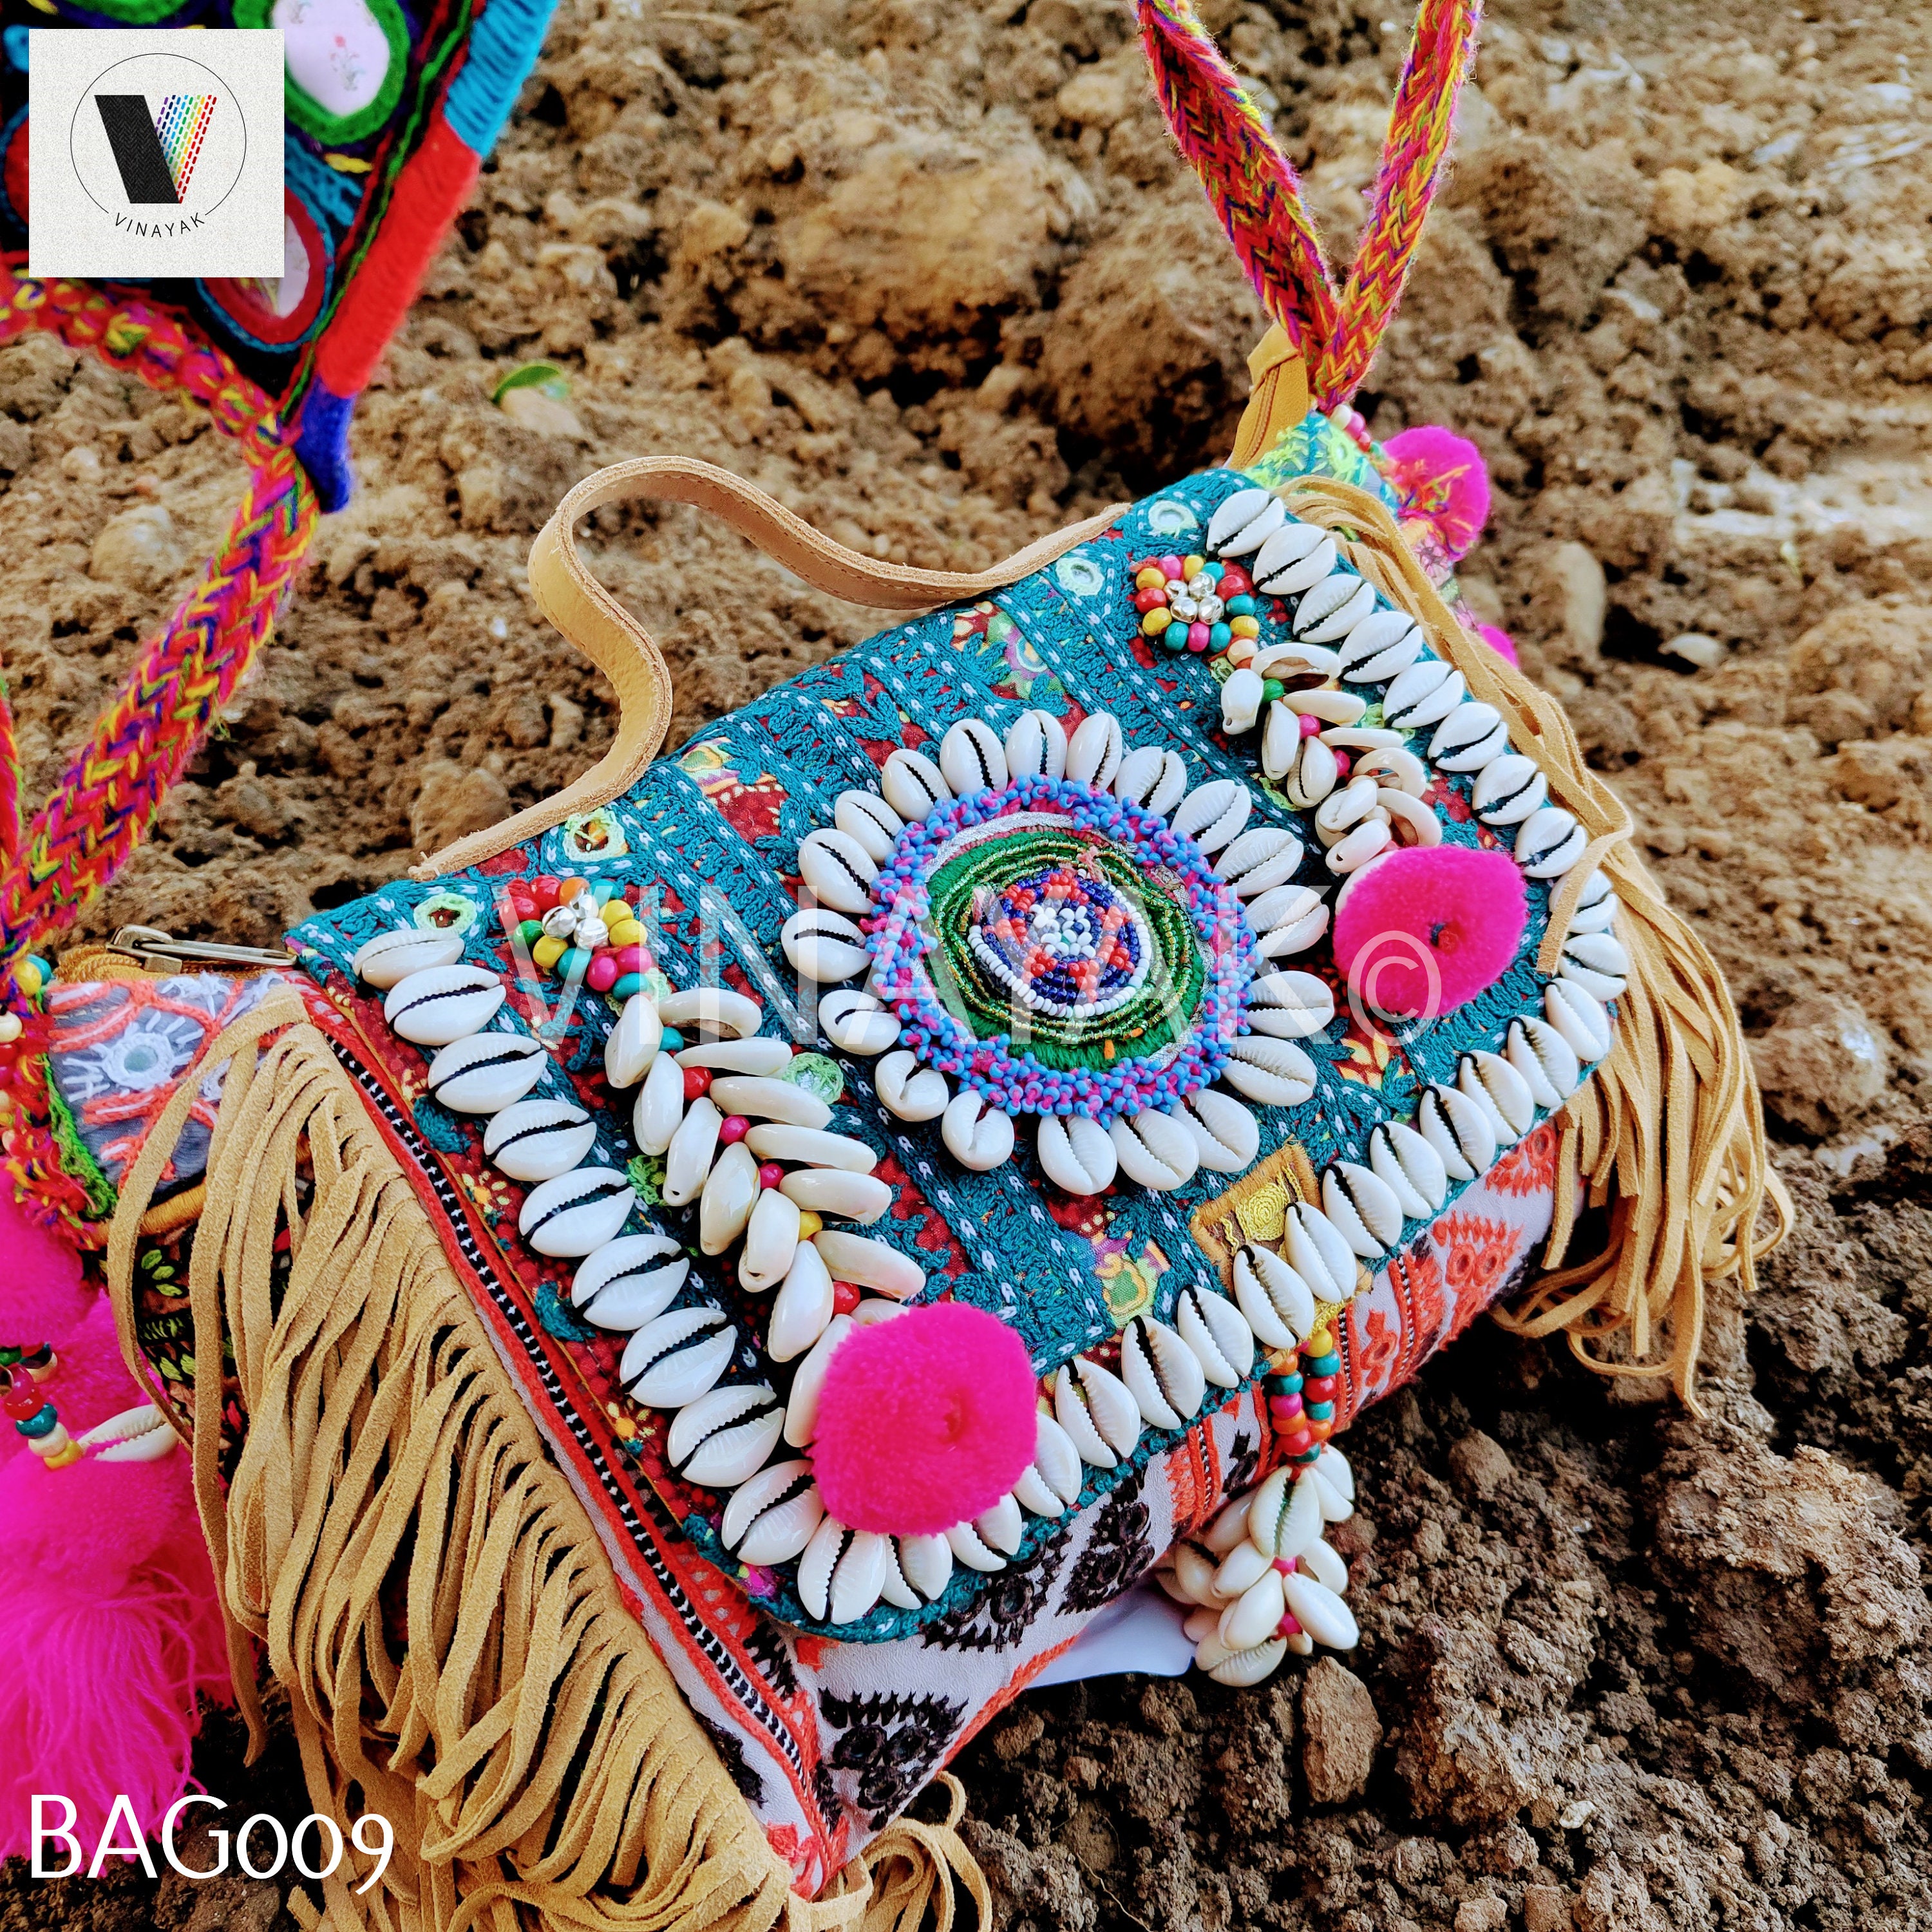 Accessories By Aaradhya Bohemian Style Clutch Indian boho bag comes with  intricate beadwork for Crossbody Bag Pouch